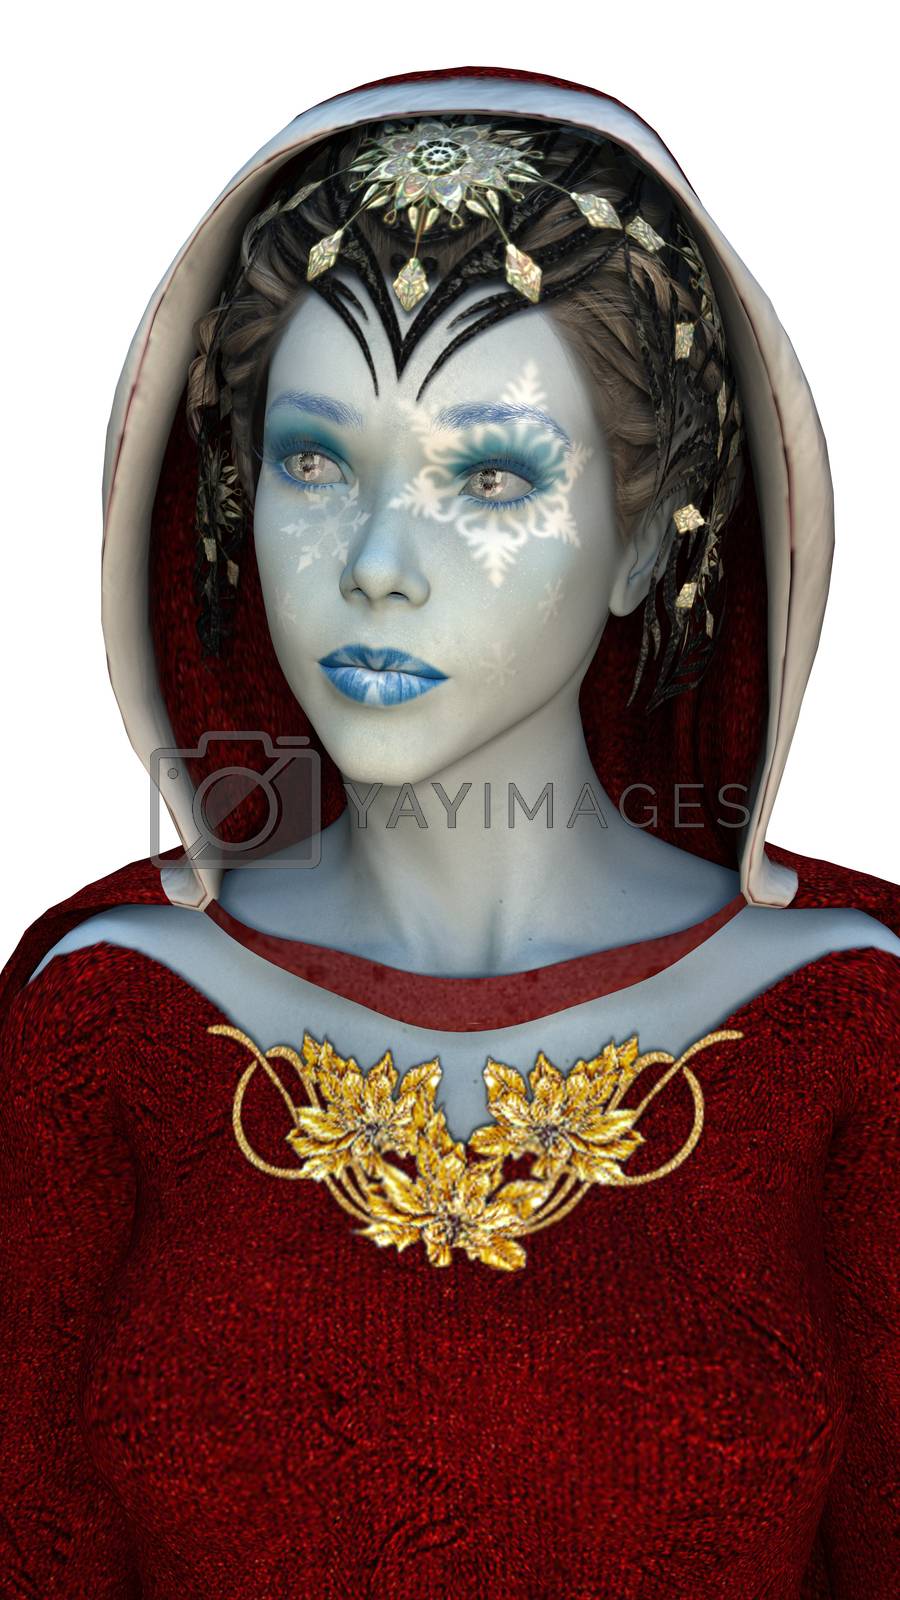 Royalty free image of Snow Maiden by Vac